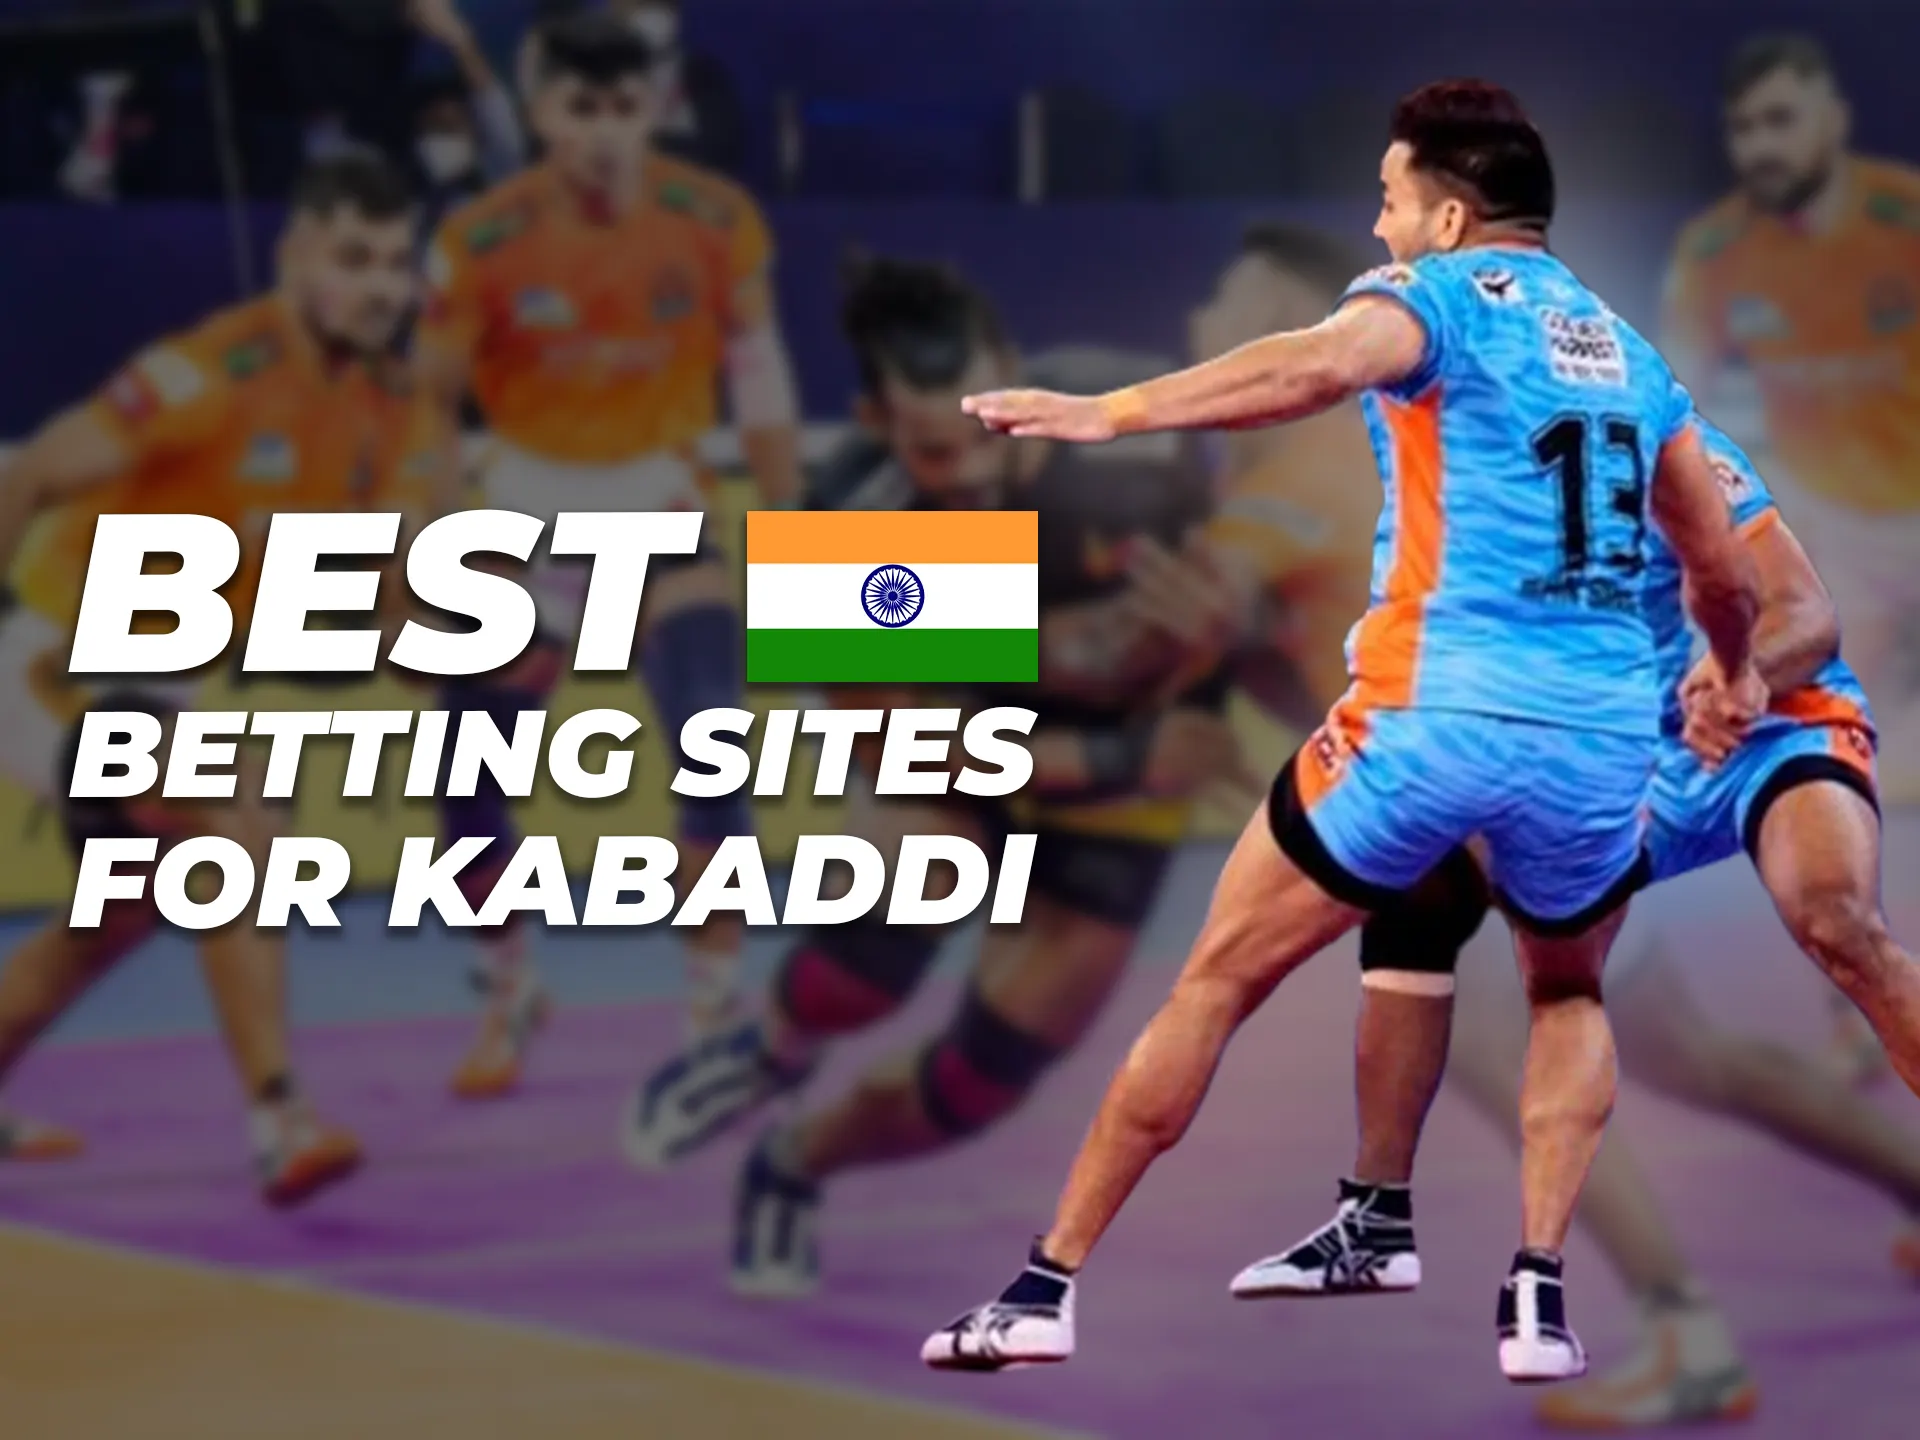 Bet on kabaddi only on the best sites.